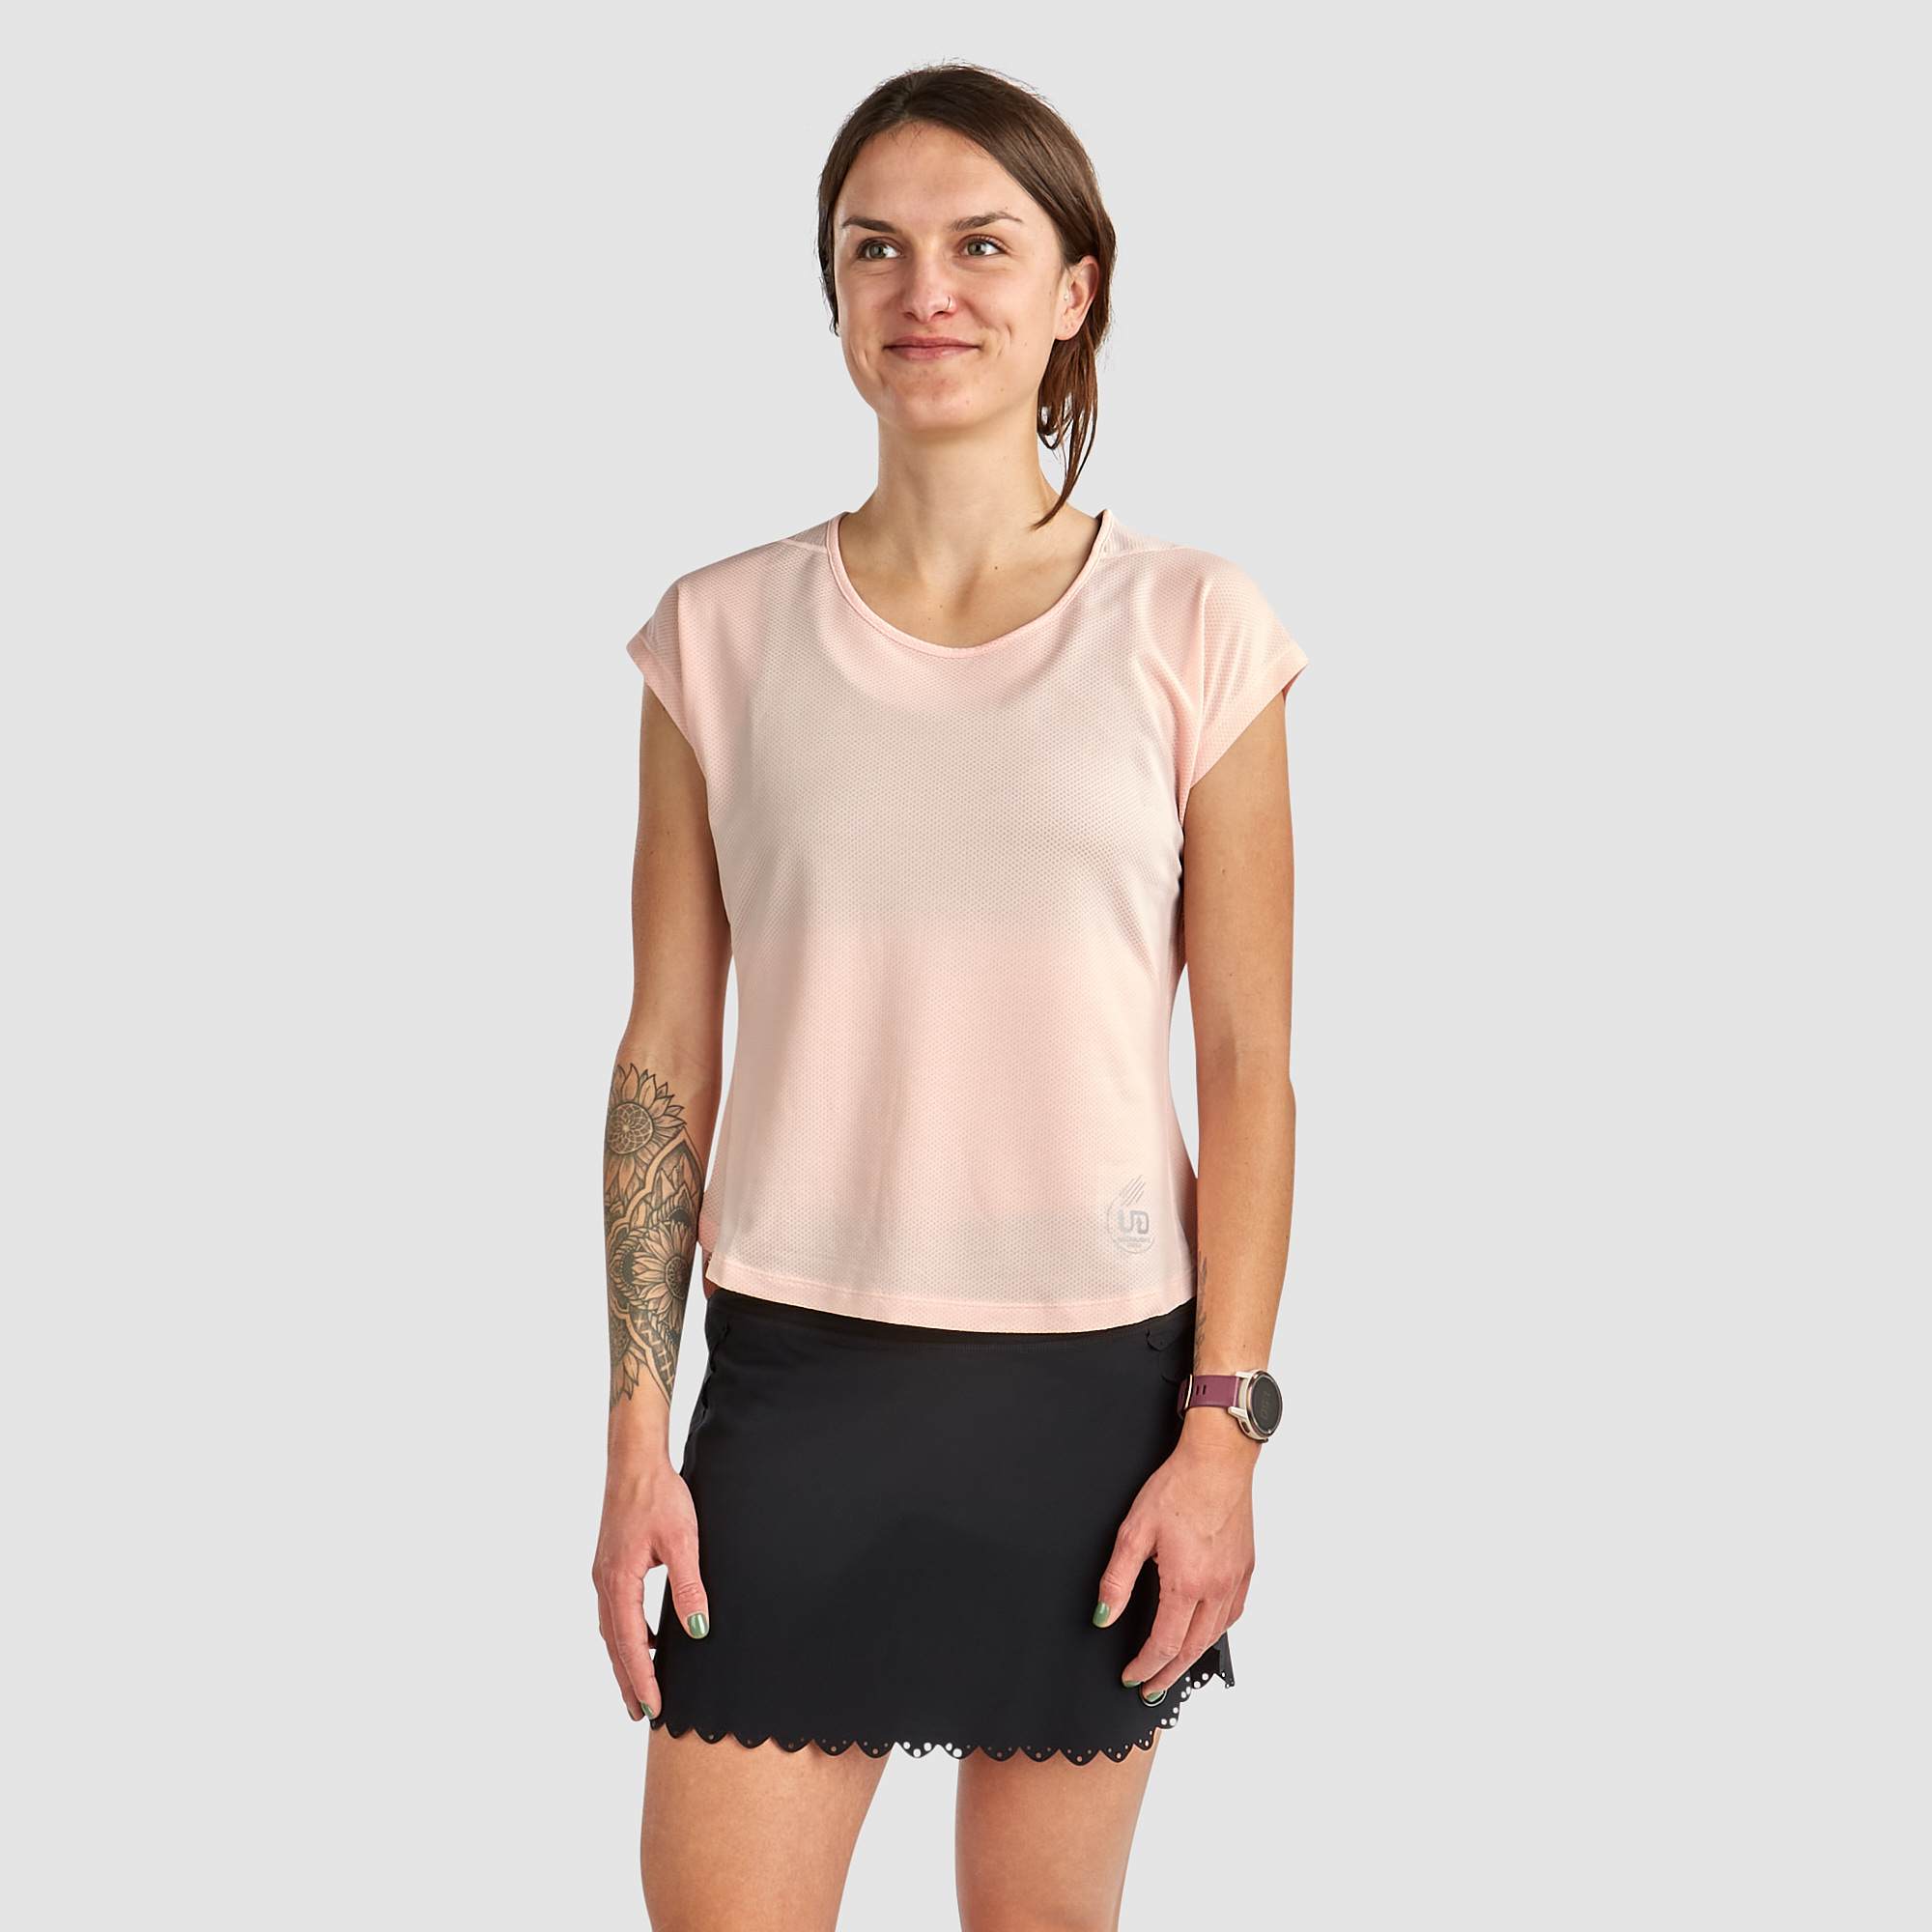 Ultimate Direction Women's Nimbus T-Shirt - Prior Year in Millennial Pink Size Large